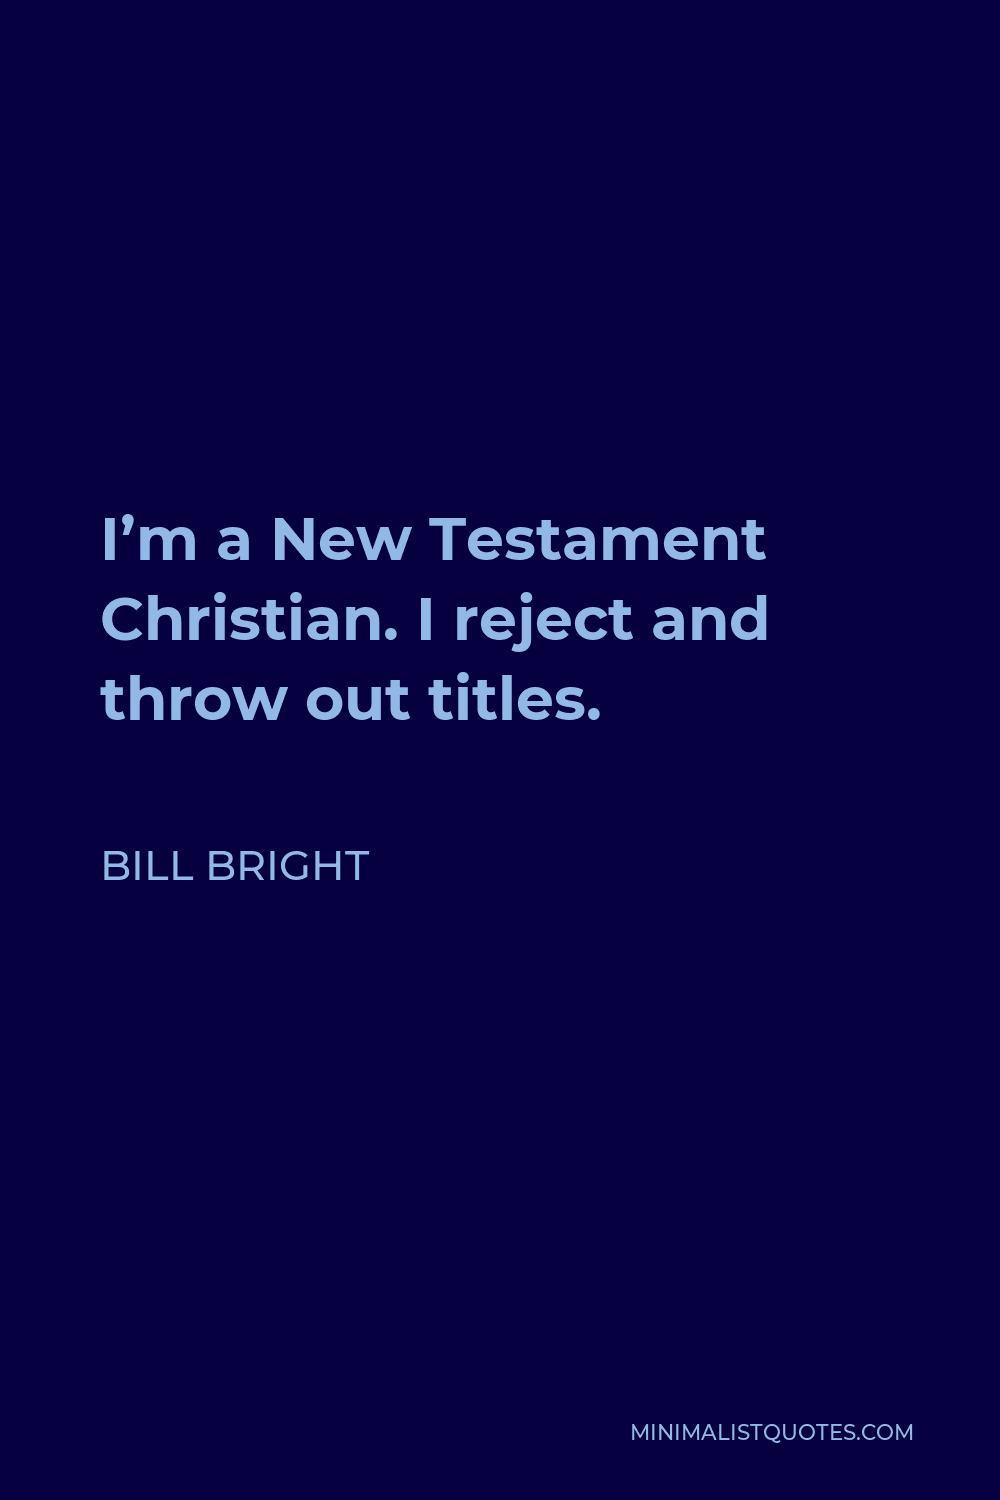 Bill Bright Quote - I’m a New Testament Christian. I reject and throw out titles.